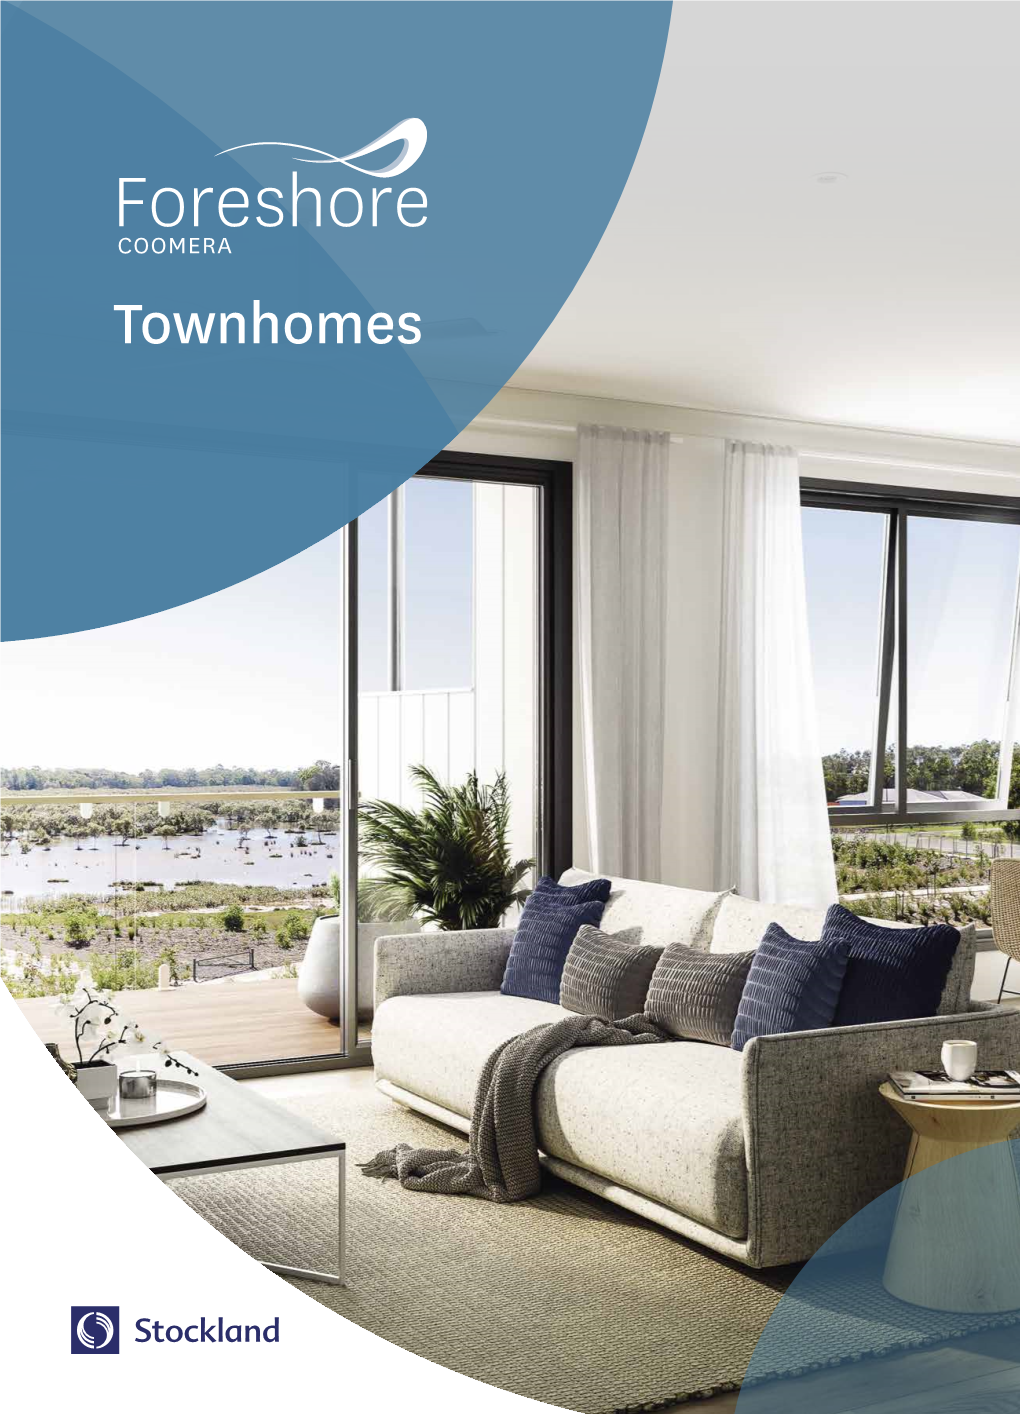 Foreshore Townhomes